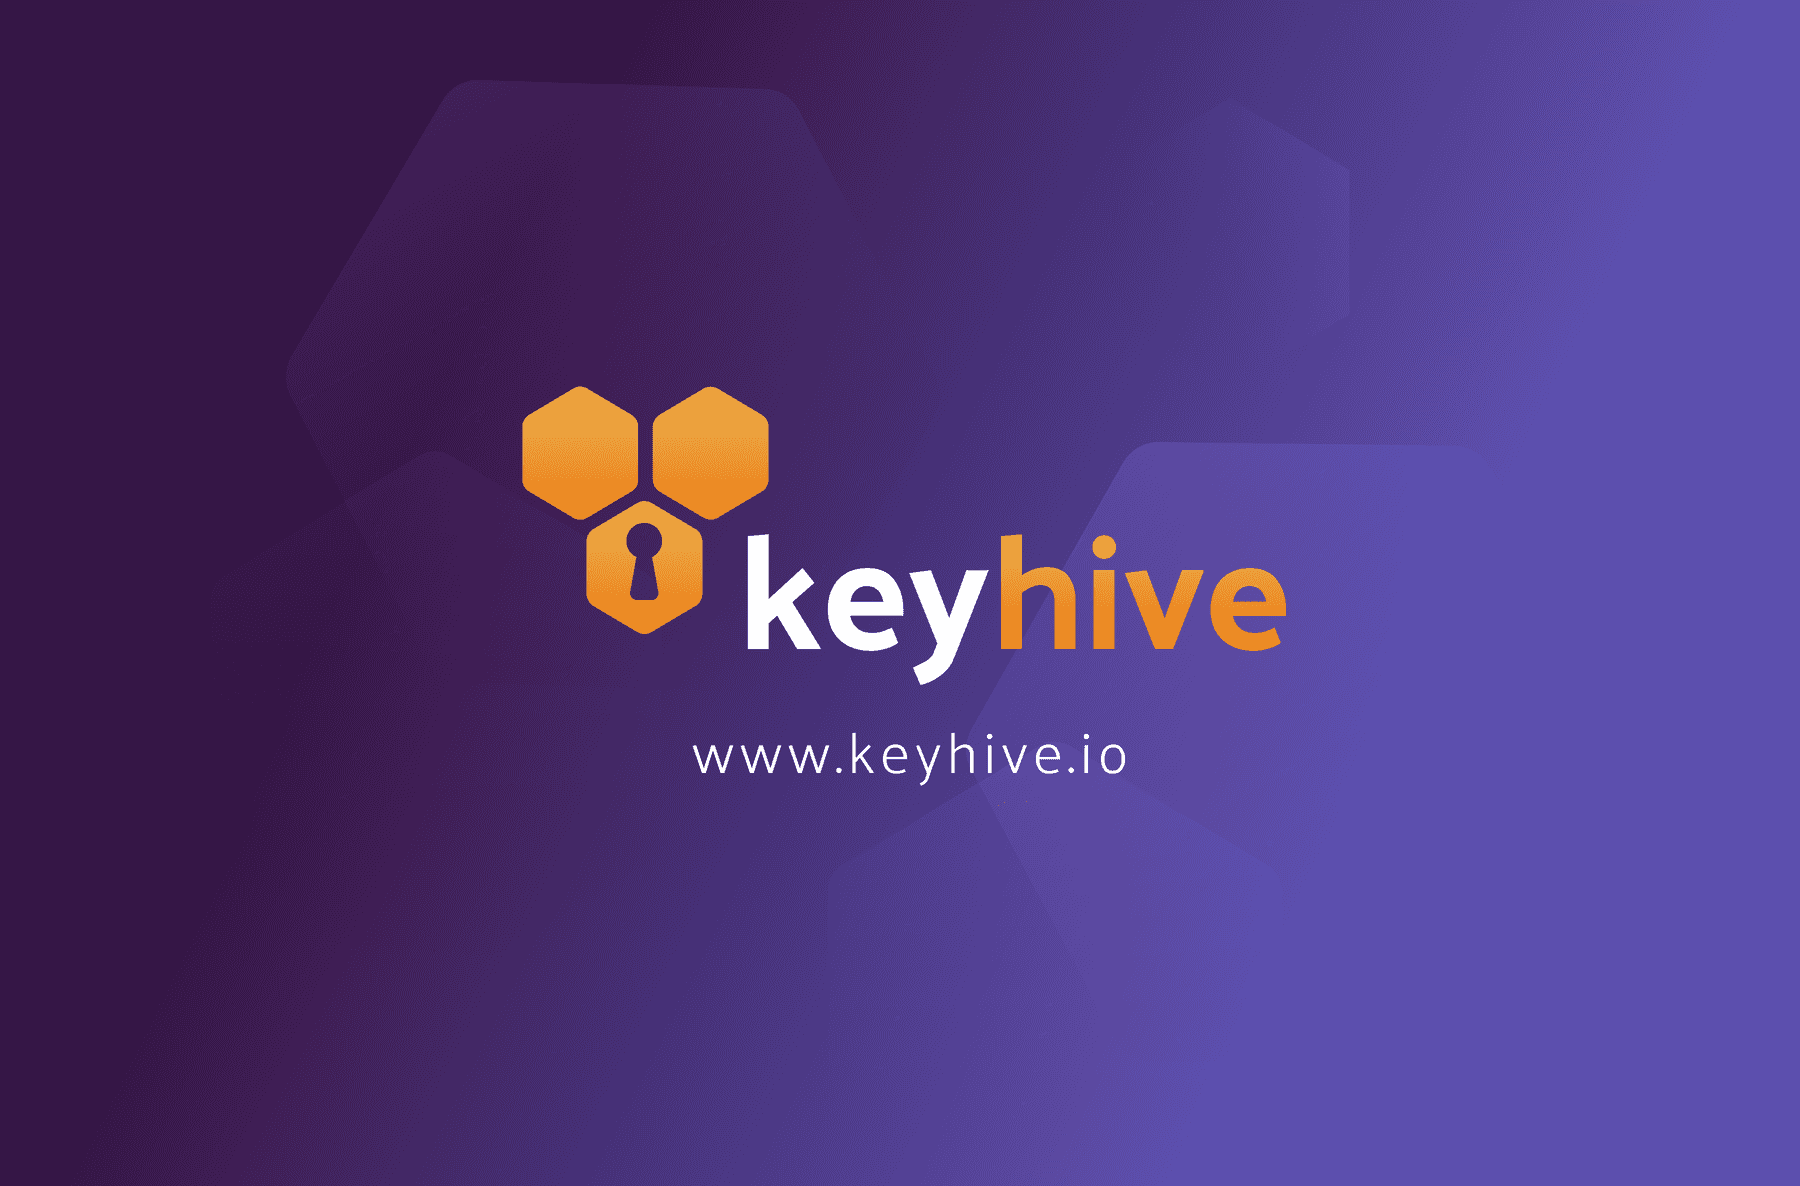 Welcome to our shiny new keyhive.io blog. Here we'll be discussing all things keyhive.io and key management...